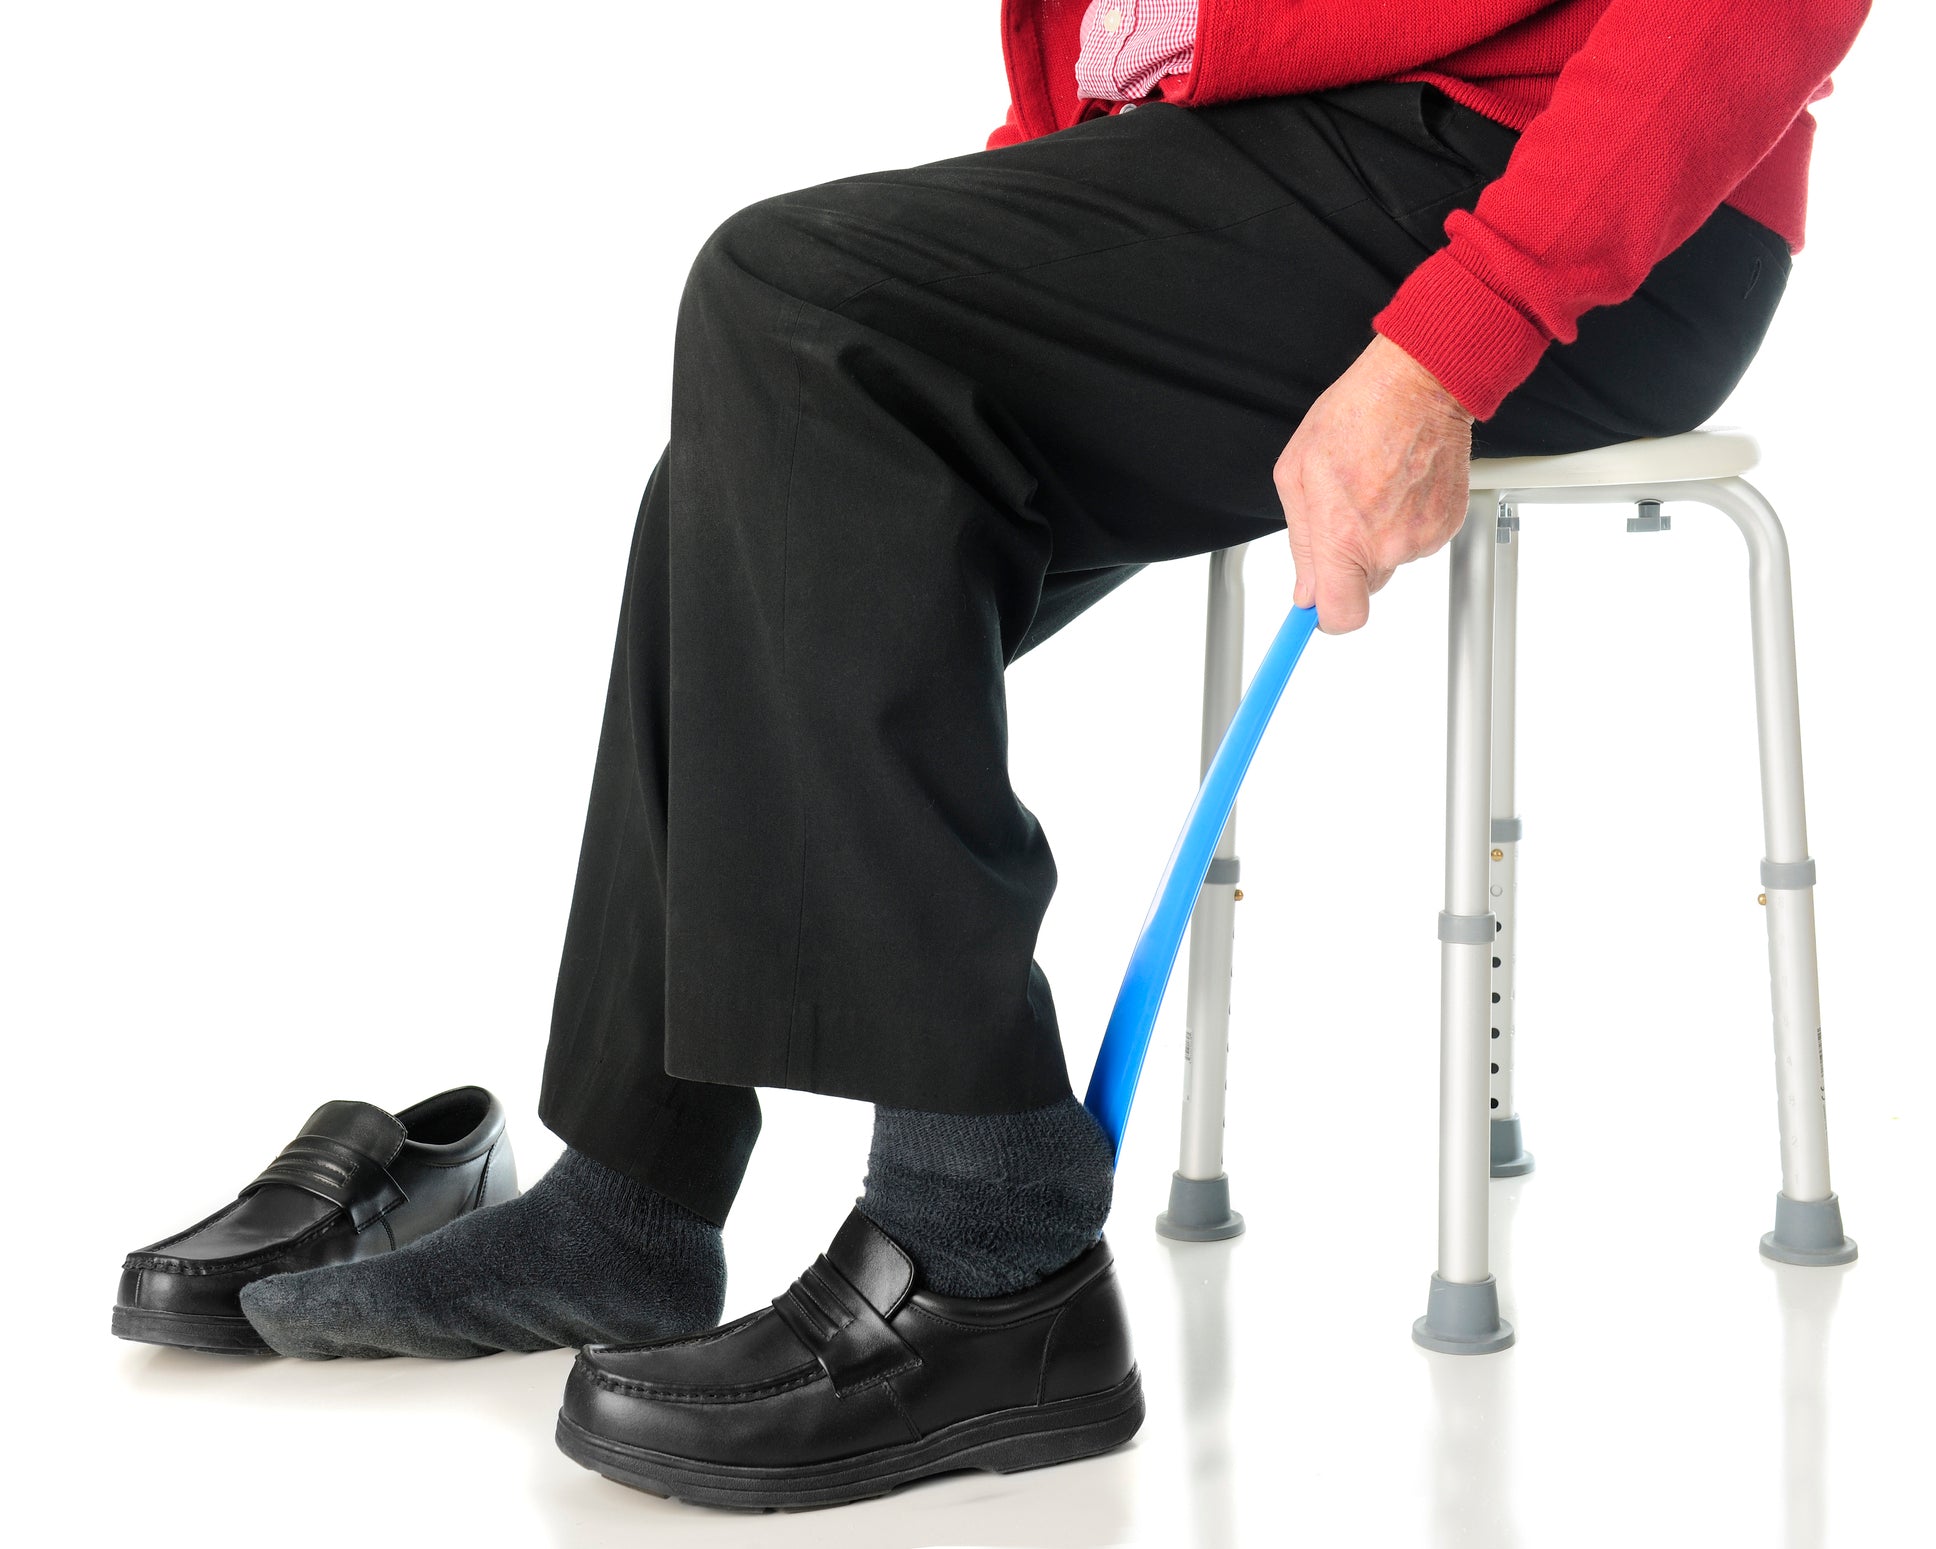 Limited Mobility Tips for Compression Socks